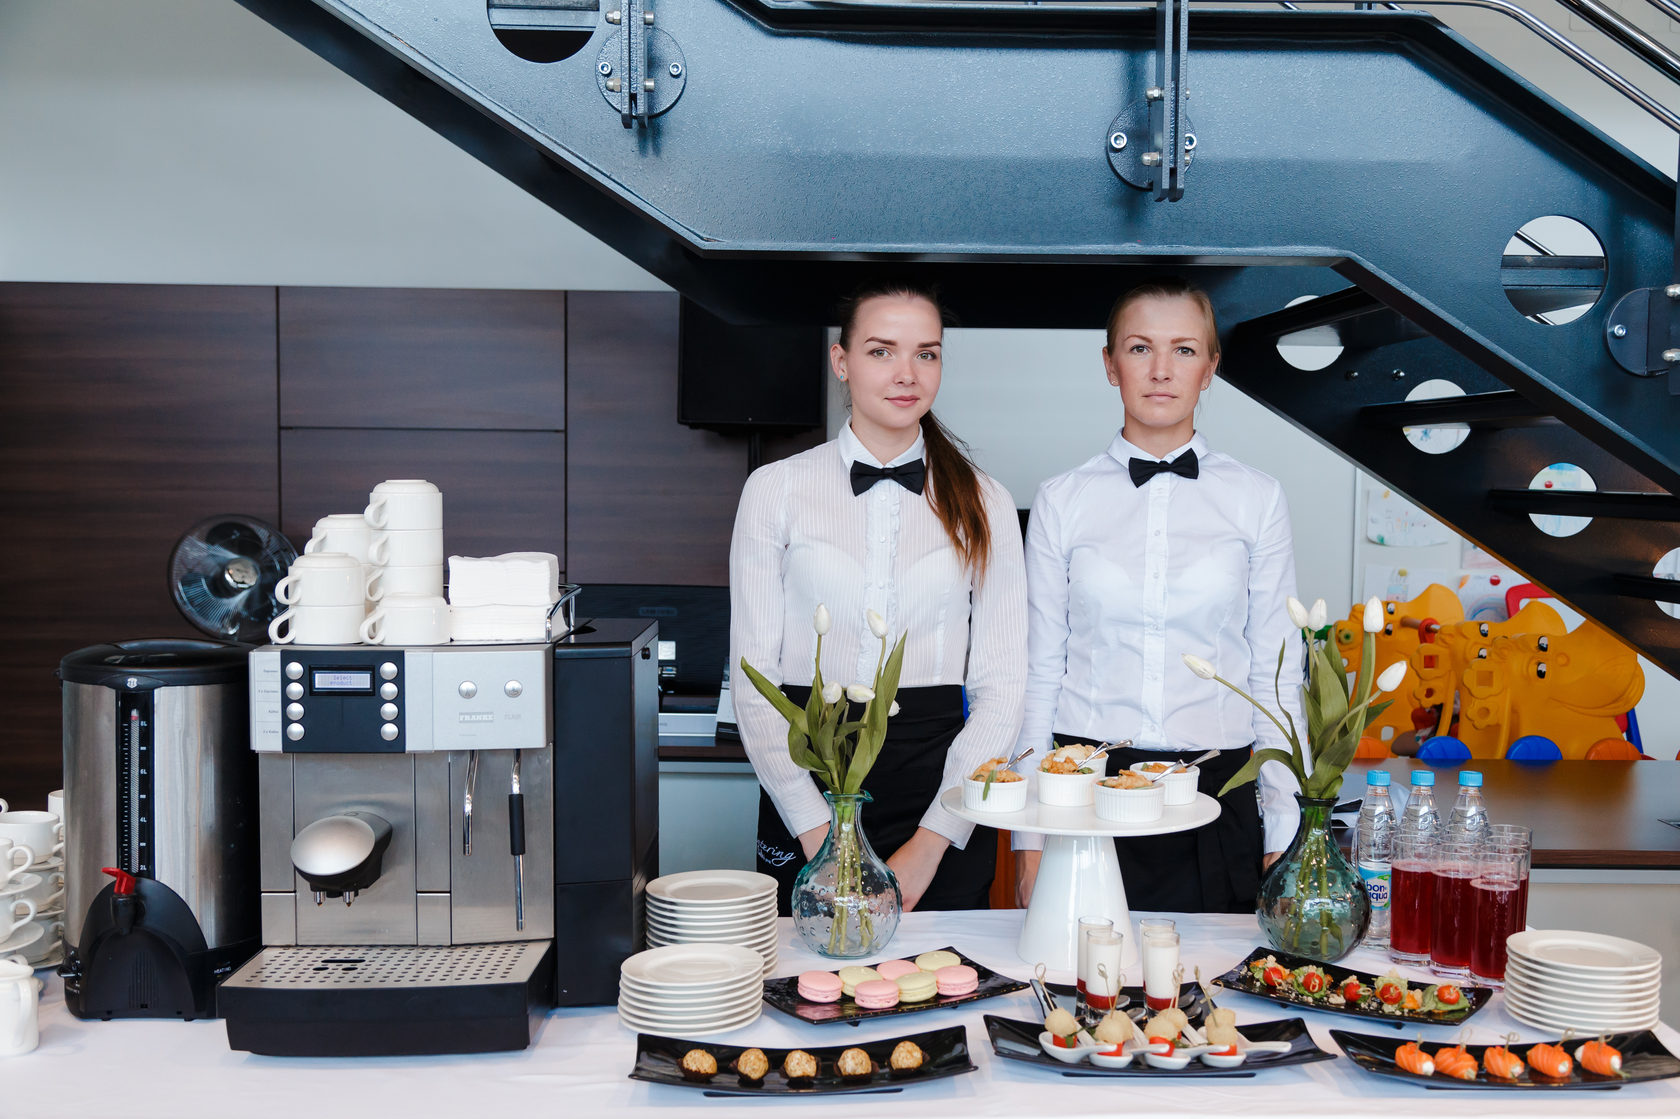 Teanectar: Elevating Your Corporate Events with Professional Coffee Service